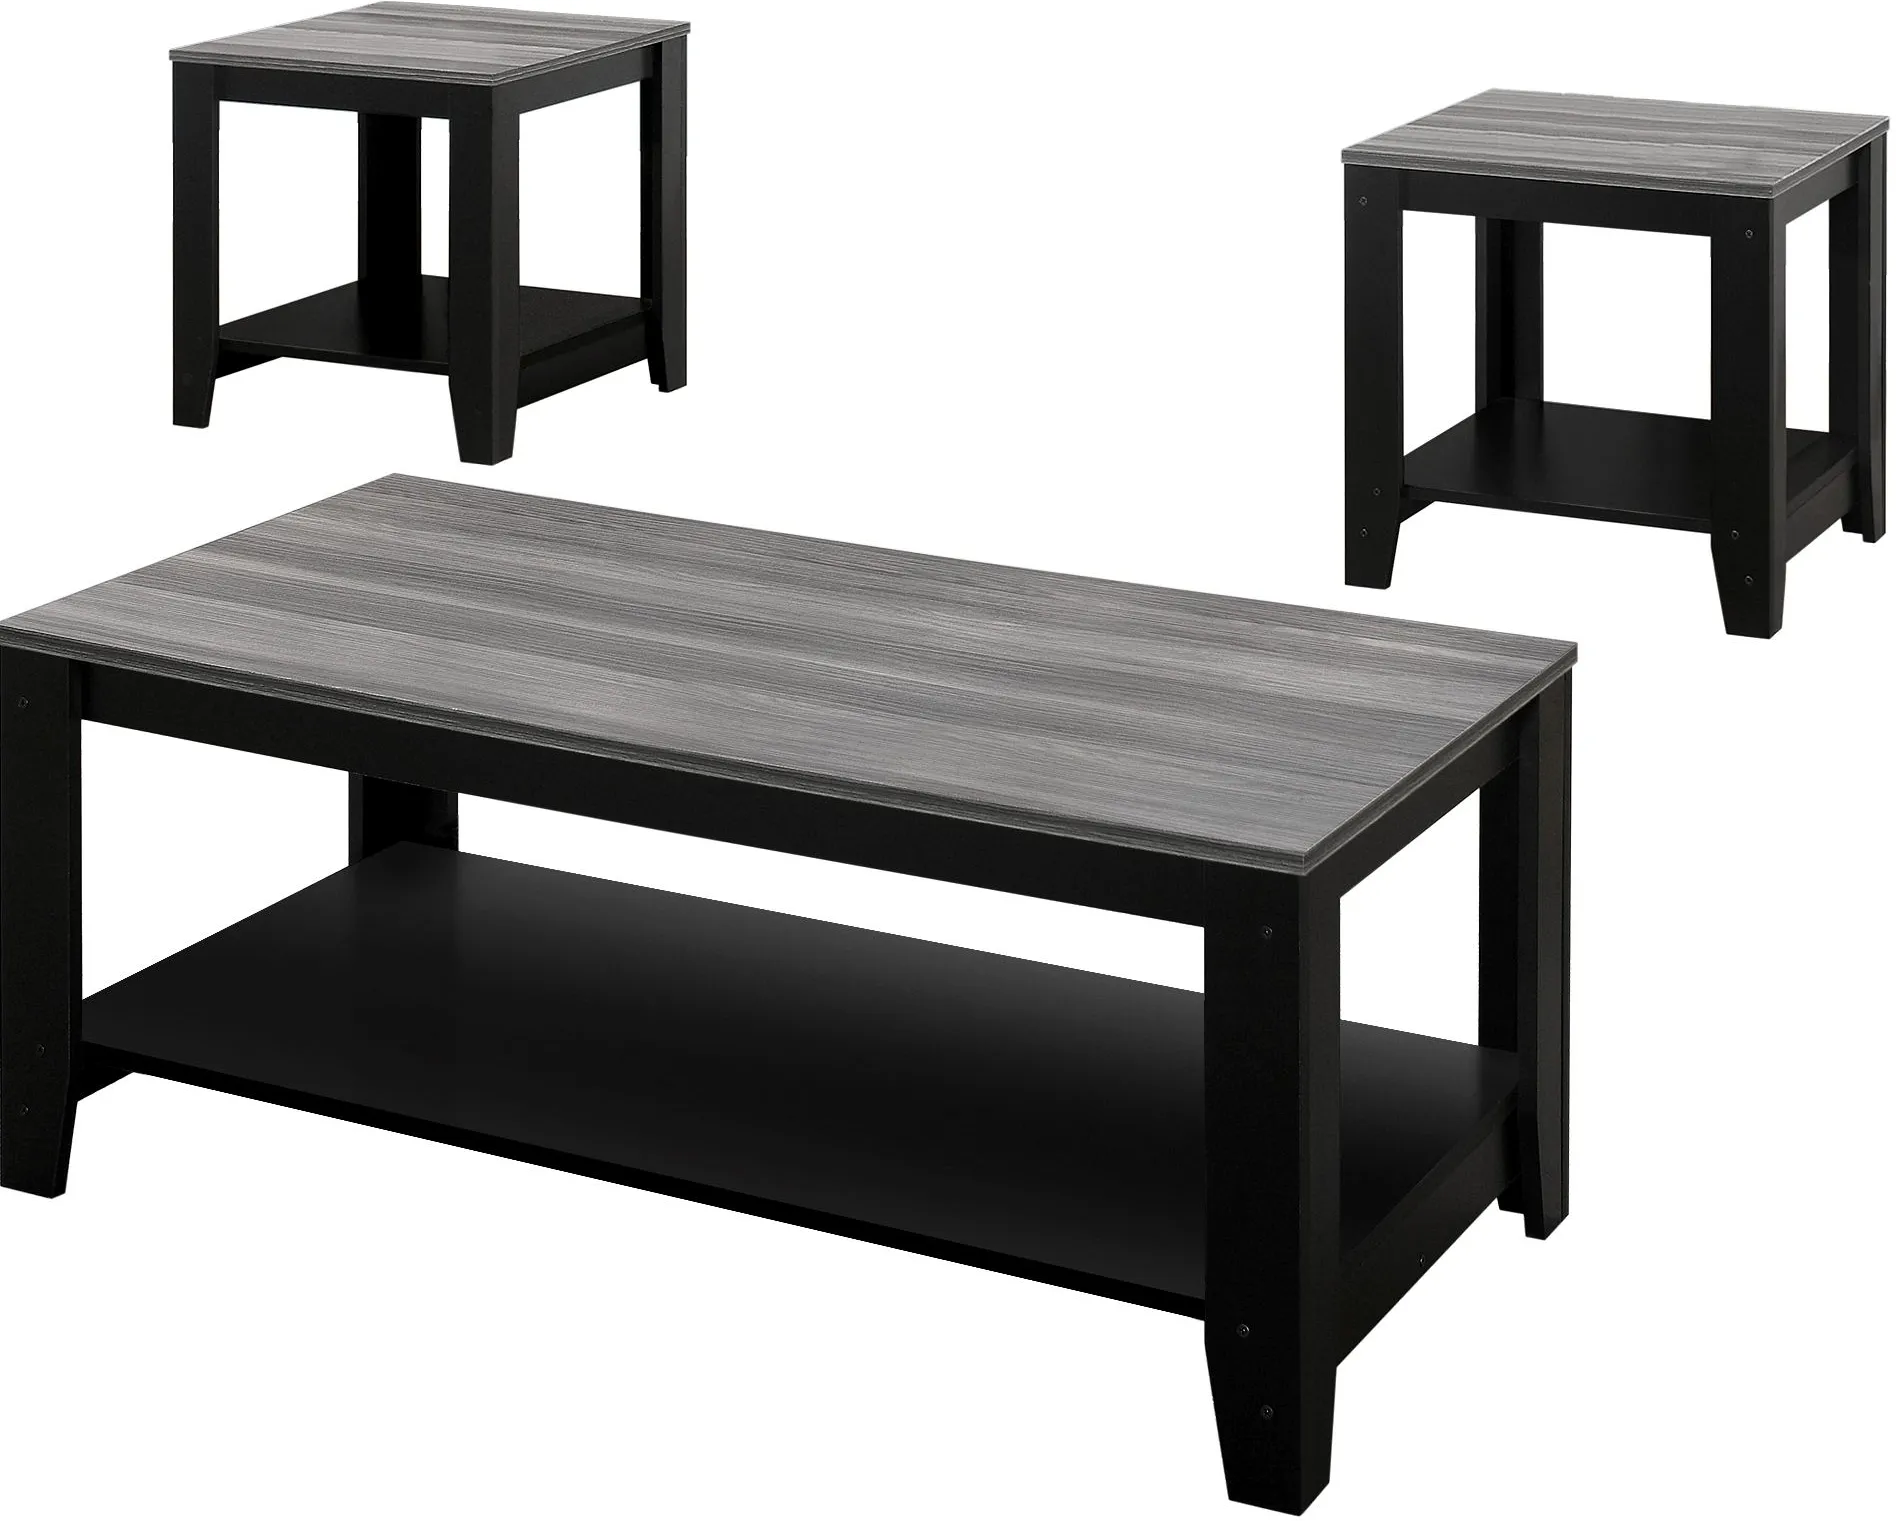 Table Set, 3Pcs Set, Coffee, End, Side, Accent, Living Room, Laminate, Black, Grey, Transitional